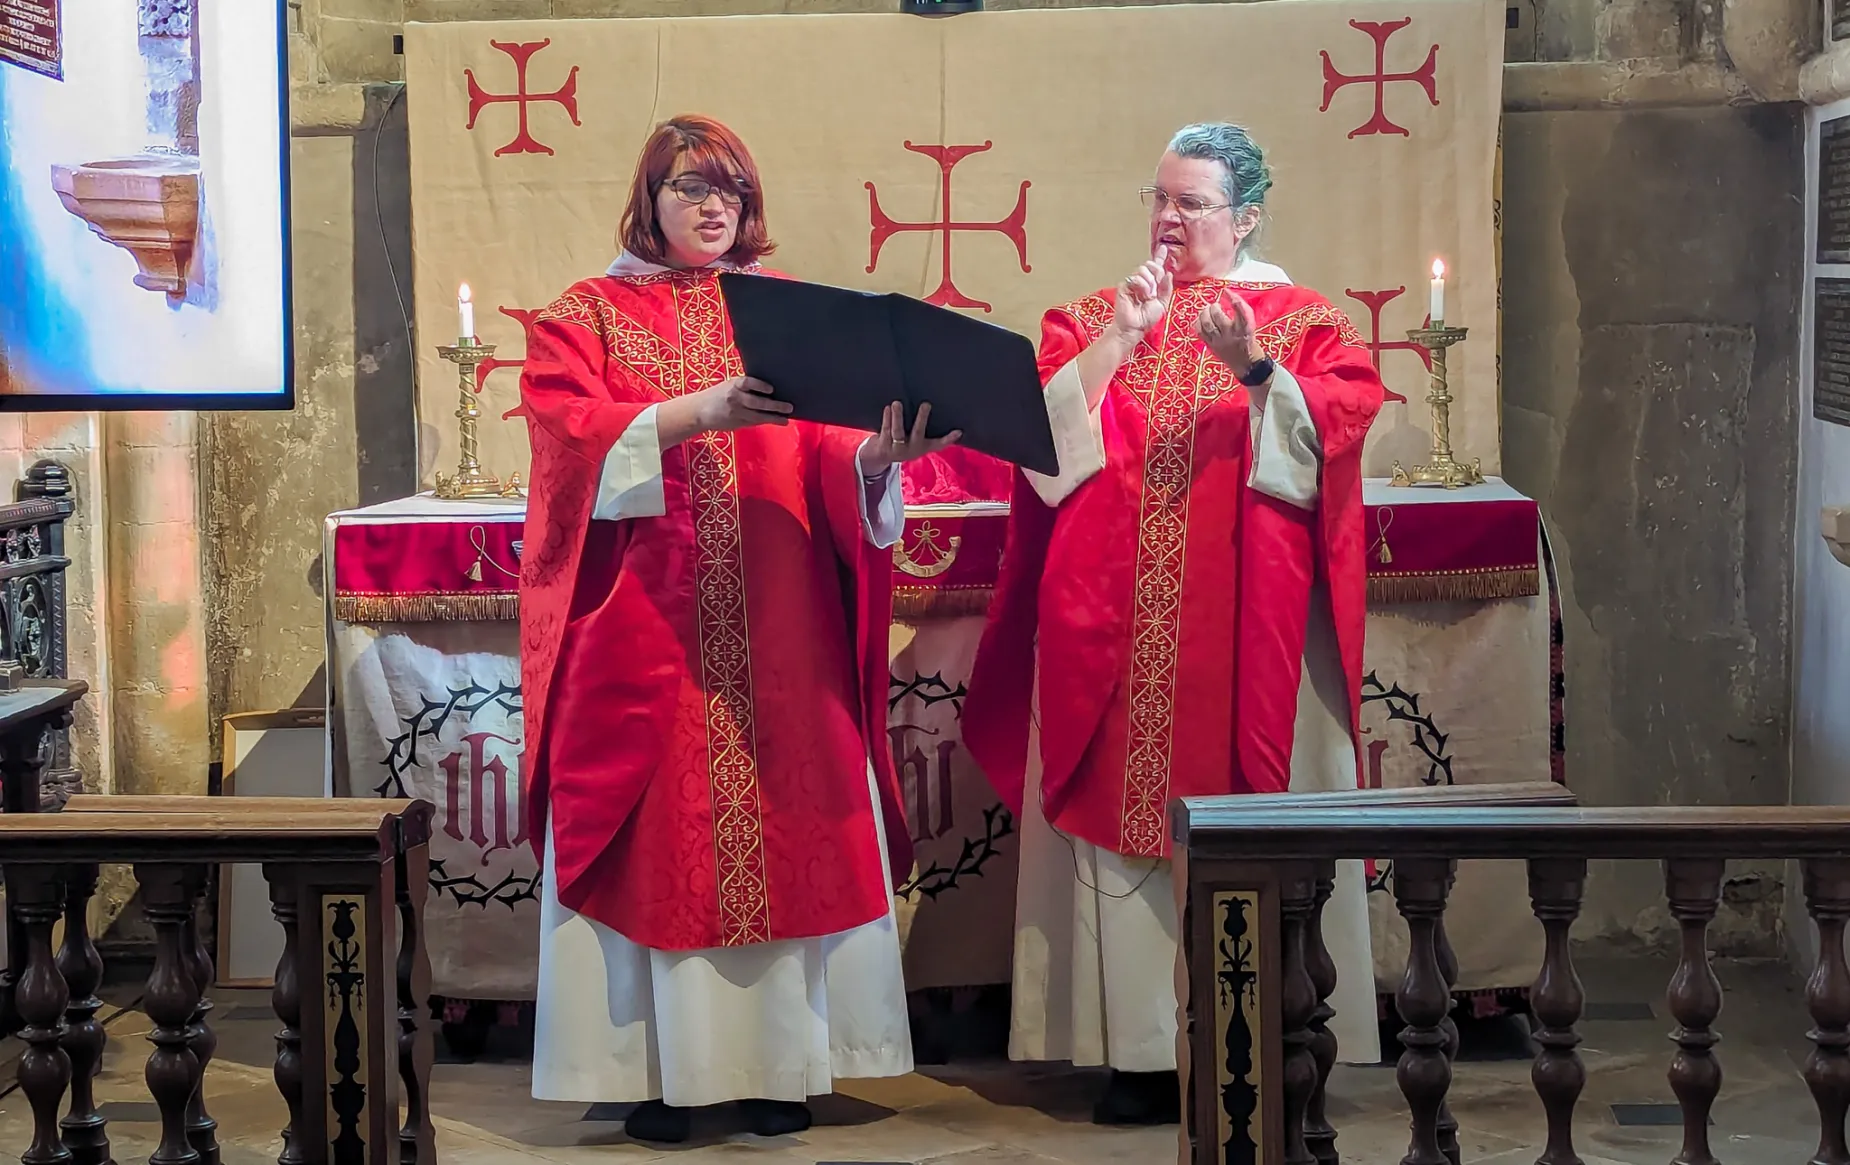 Revd Philippa White and Reverend Hannah Lewis celebrate the eucharist together. Revd Philippa is holding the book of the liturgy, while Revd Hannah is reciting the liturgy in British Sign Language, her hands in mid air. They are both wearing red chausibles, appropriate to the final weeks of Lent, and standing in front of the Remembrance Chapel altar.